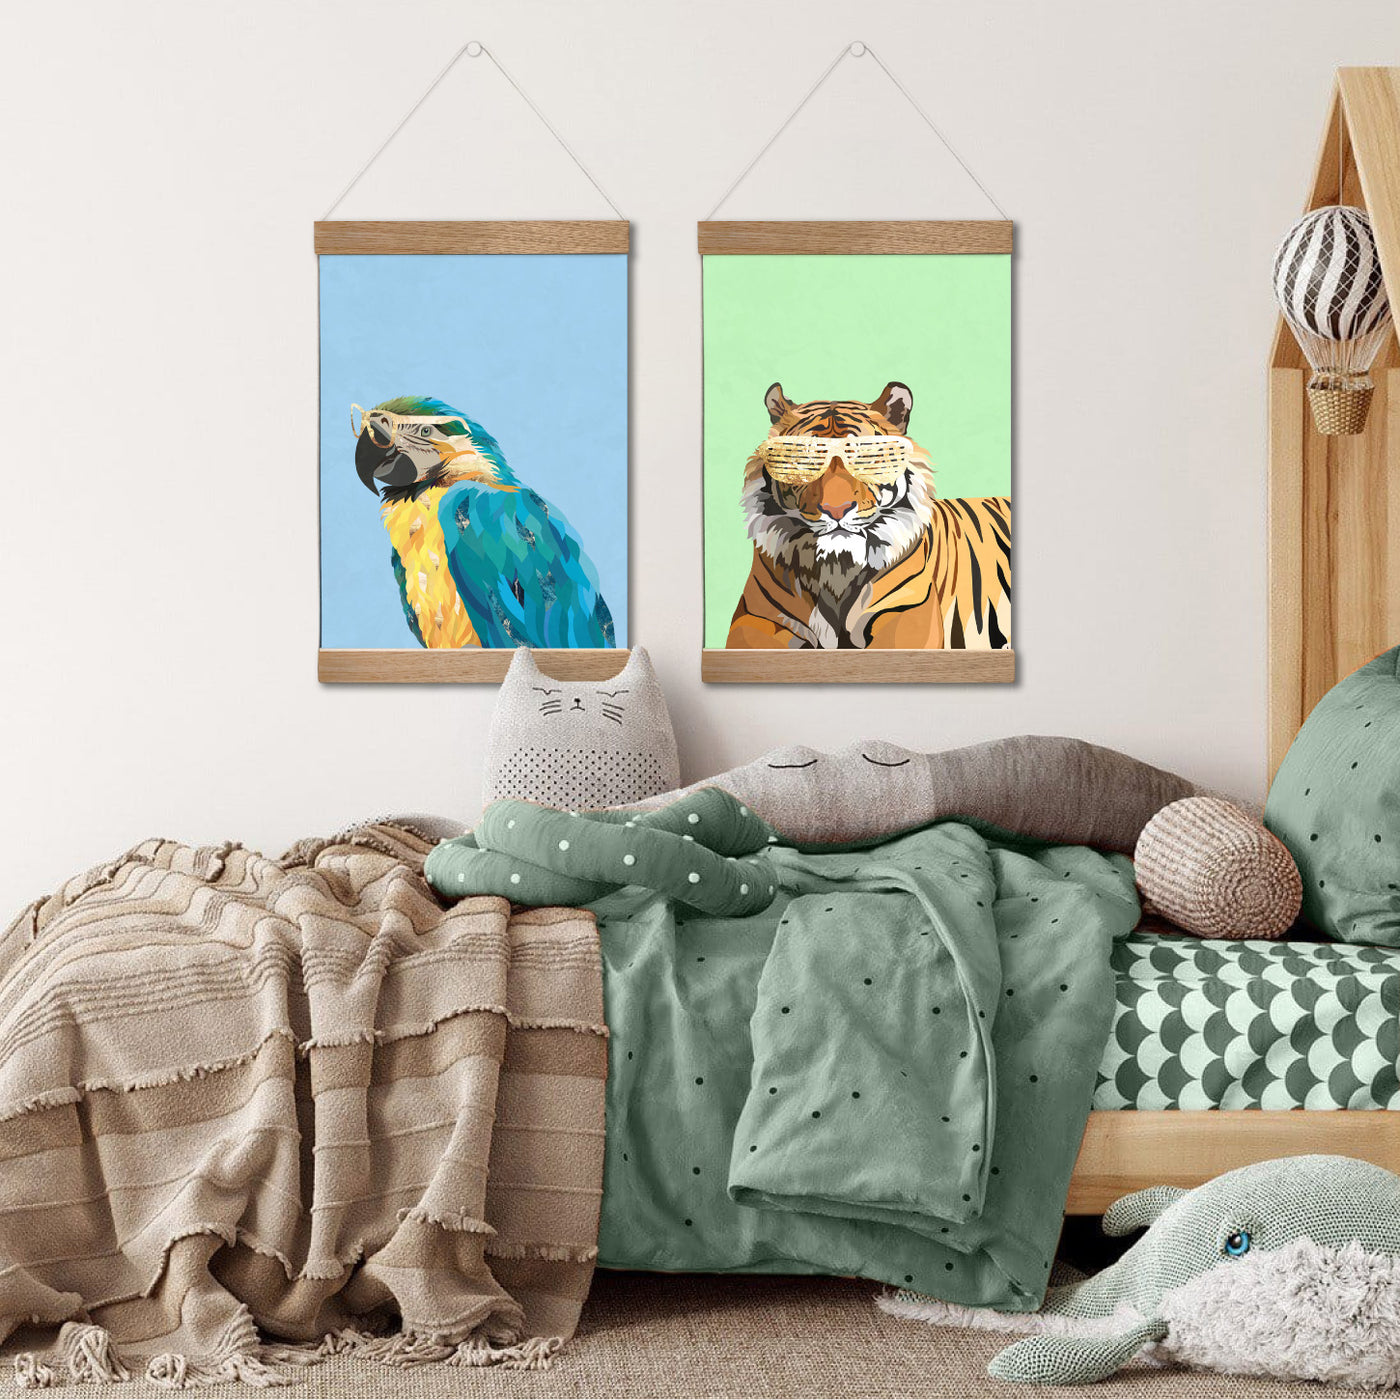 Tiger Pop - Art Print, Poster, Stretched Canvas or Framed Wall Art, shown framed in a home interior space